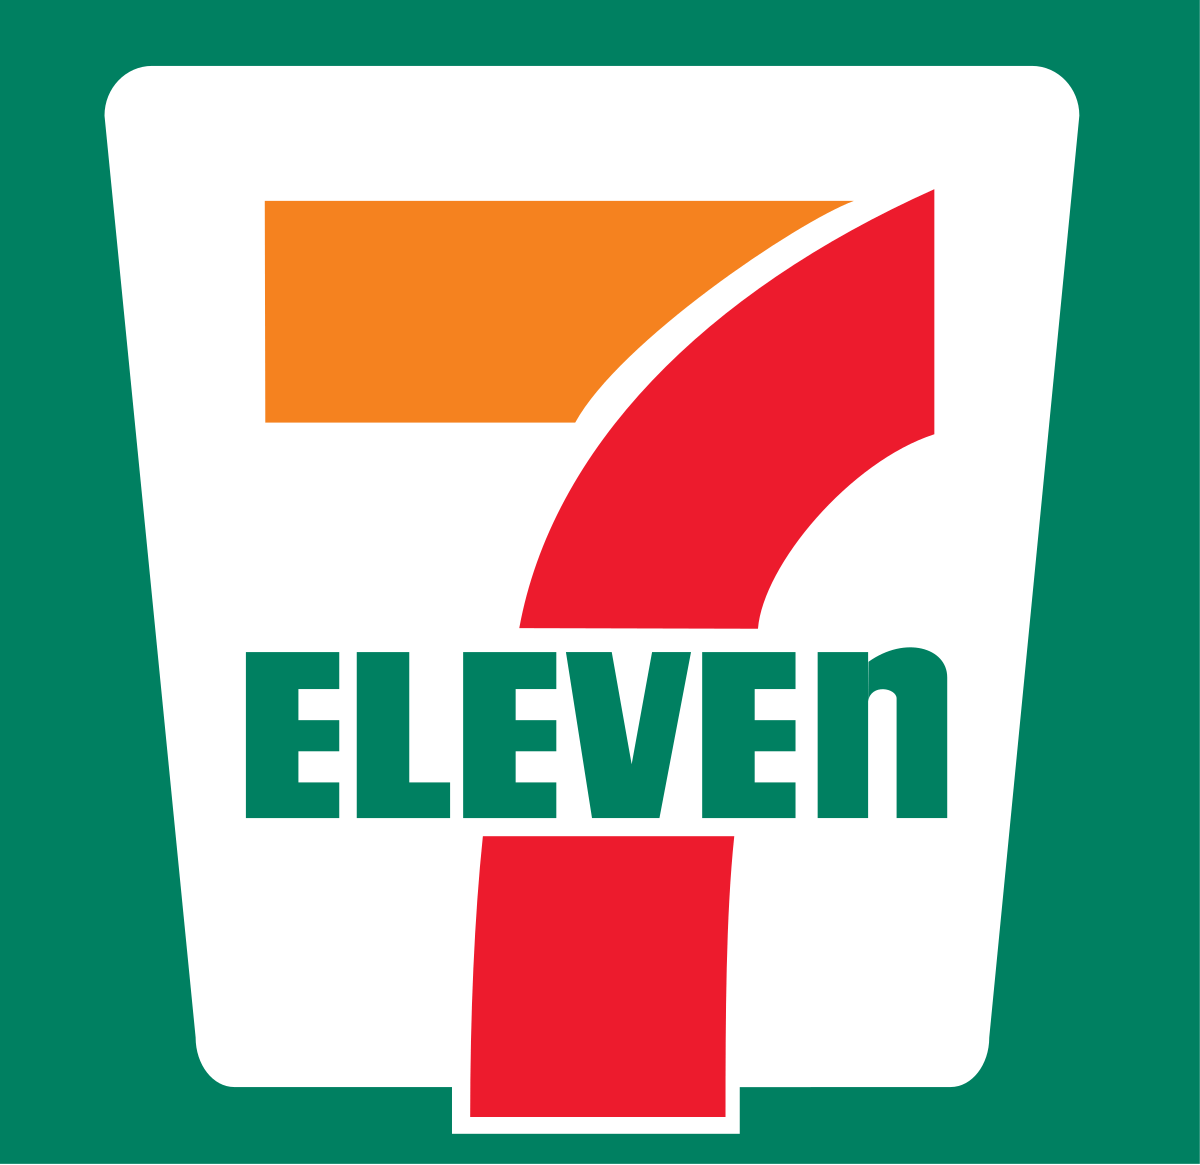 Chinese Conglomerate Logo - 7-Eleven